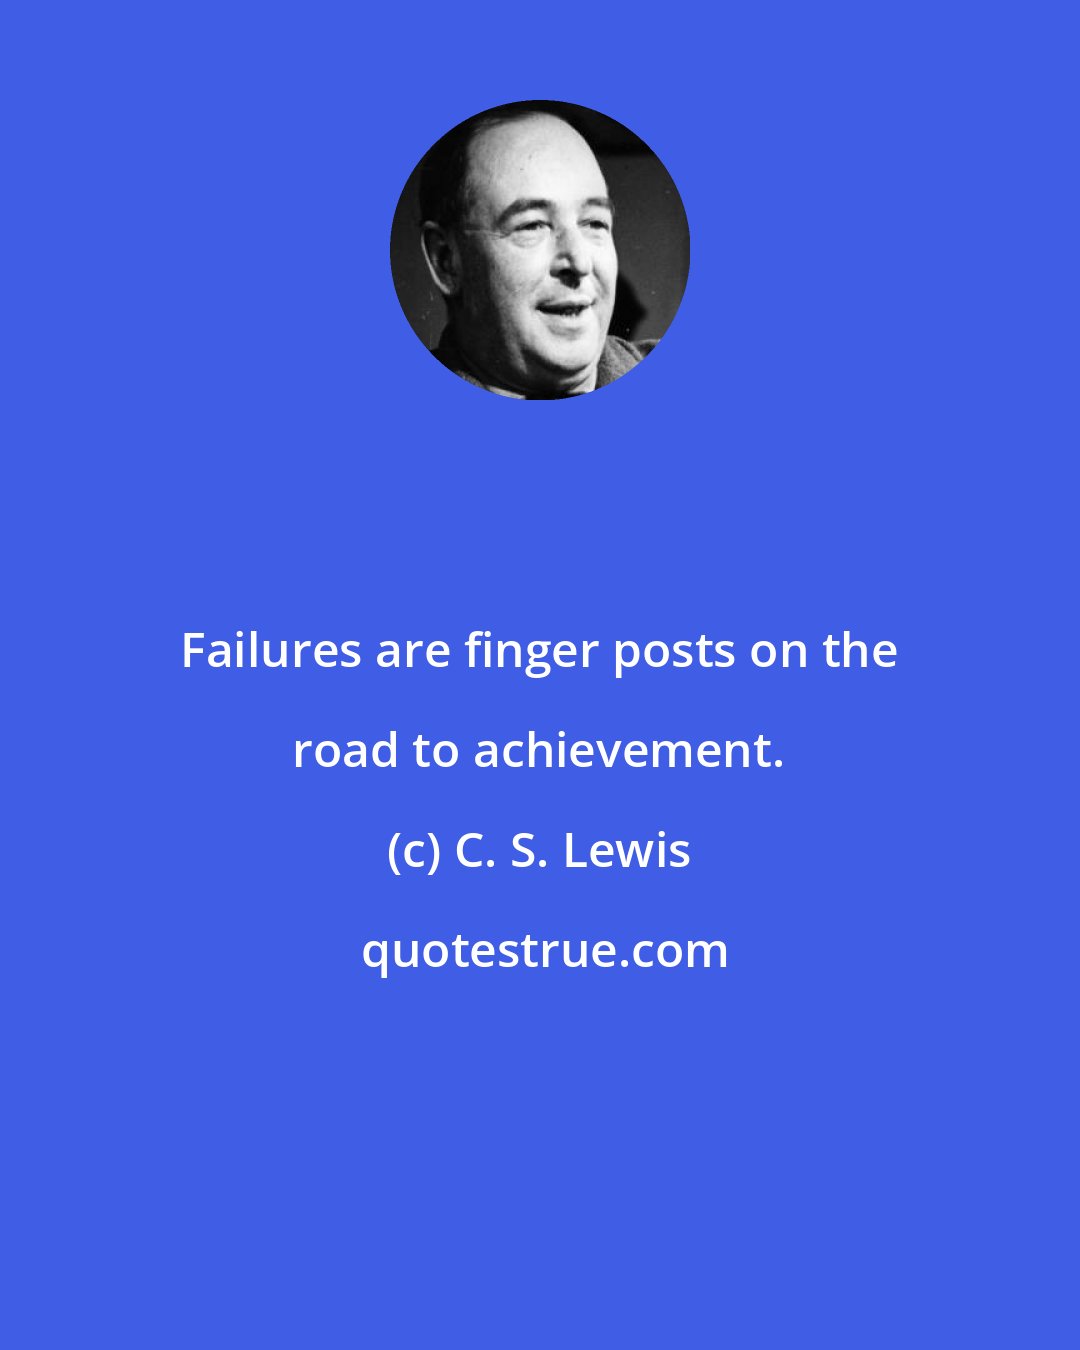 C. S. Lewis: Failures are finger posts on the road to achievement.